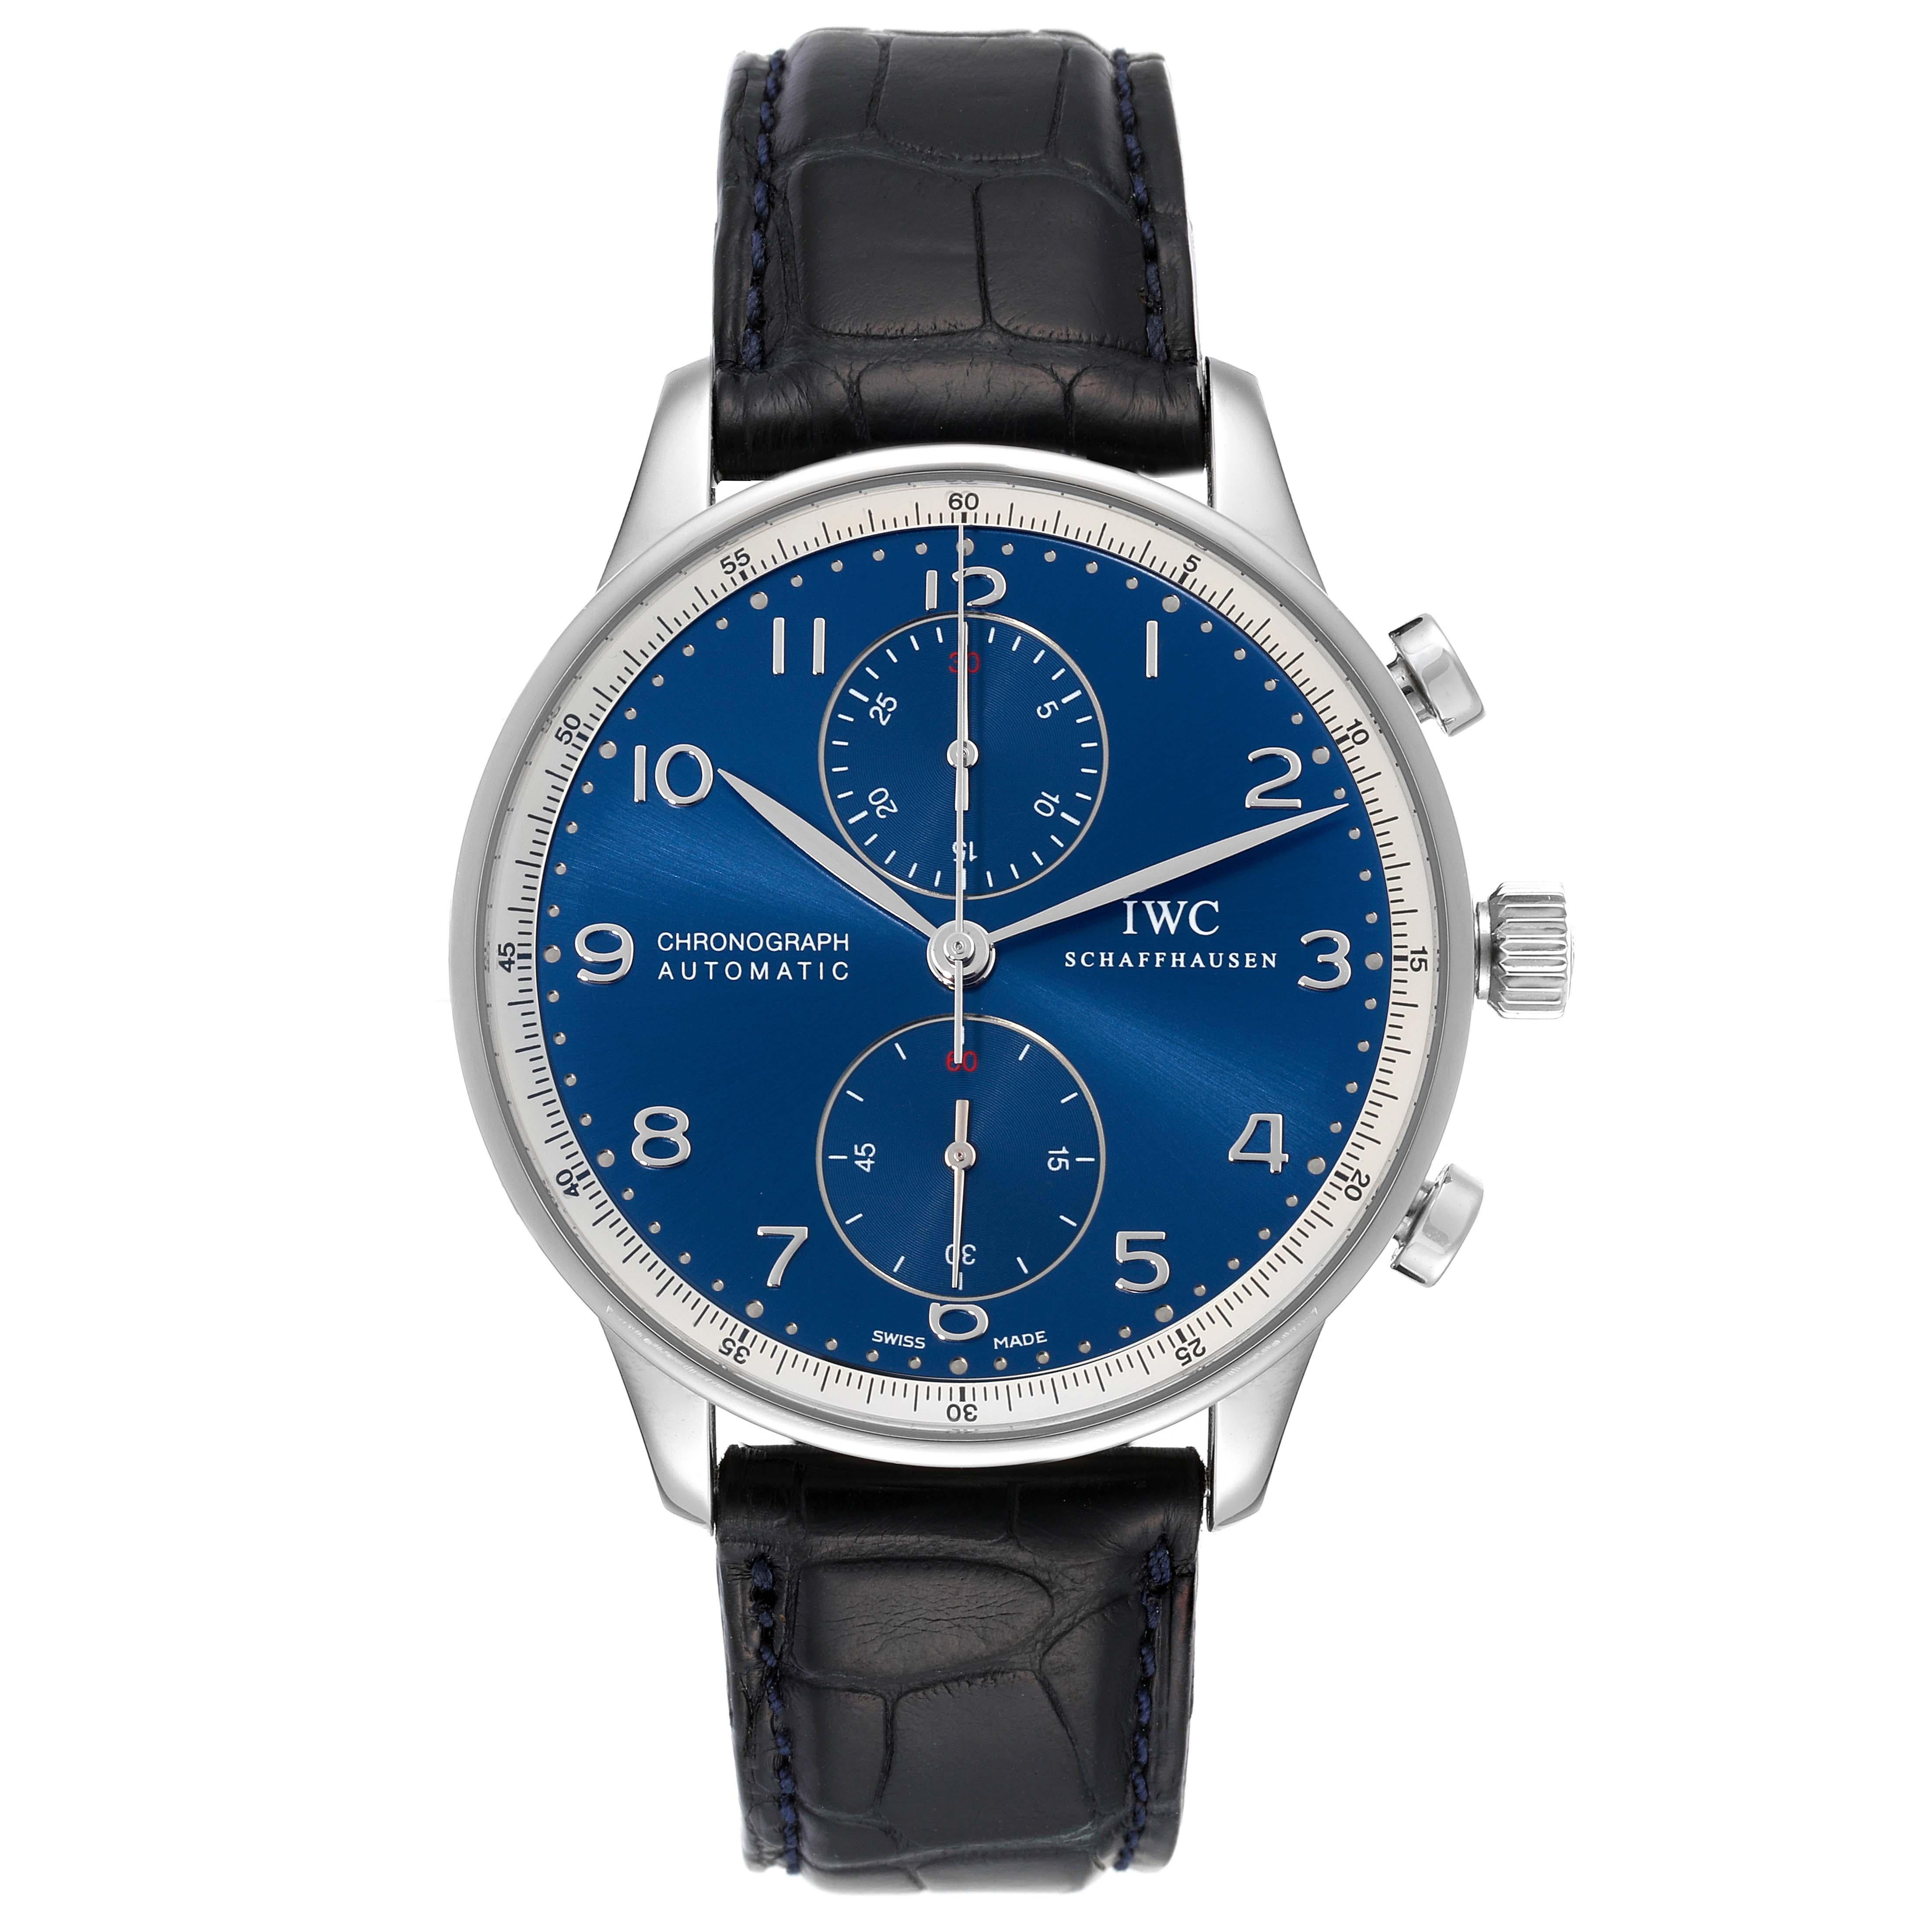 IWC Portuguese Chronograph Blue Dial Steel Mens Watch IW371432 Box Card. Automatic self-winding movement. Stainless steel case 40.9 mm in diameter. 'Laureus Sport for Good' logo ingraving on a caseback. . Scratch resistant sapphire crystal. Blue